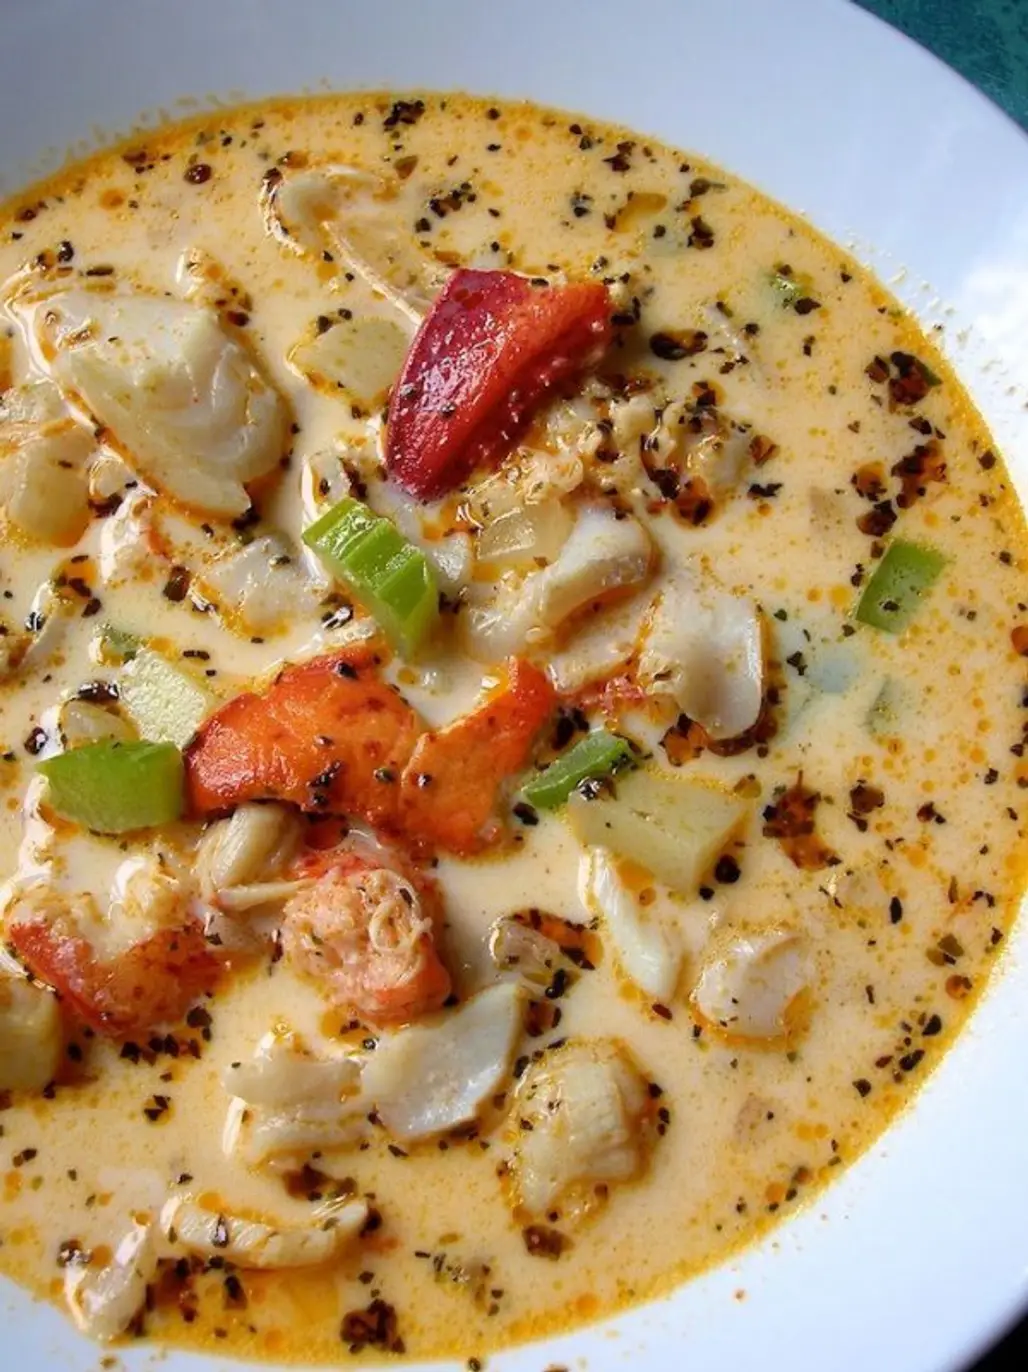 Summer Beaucoup Seafood Chowder